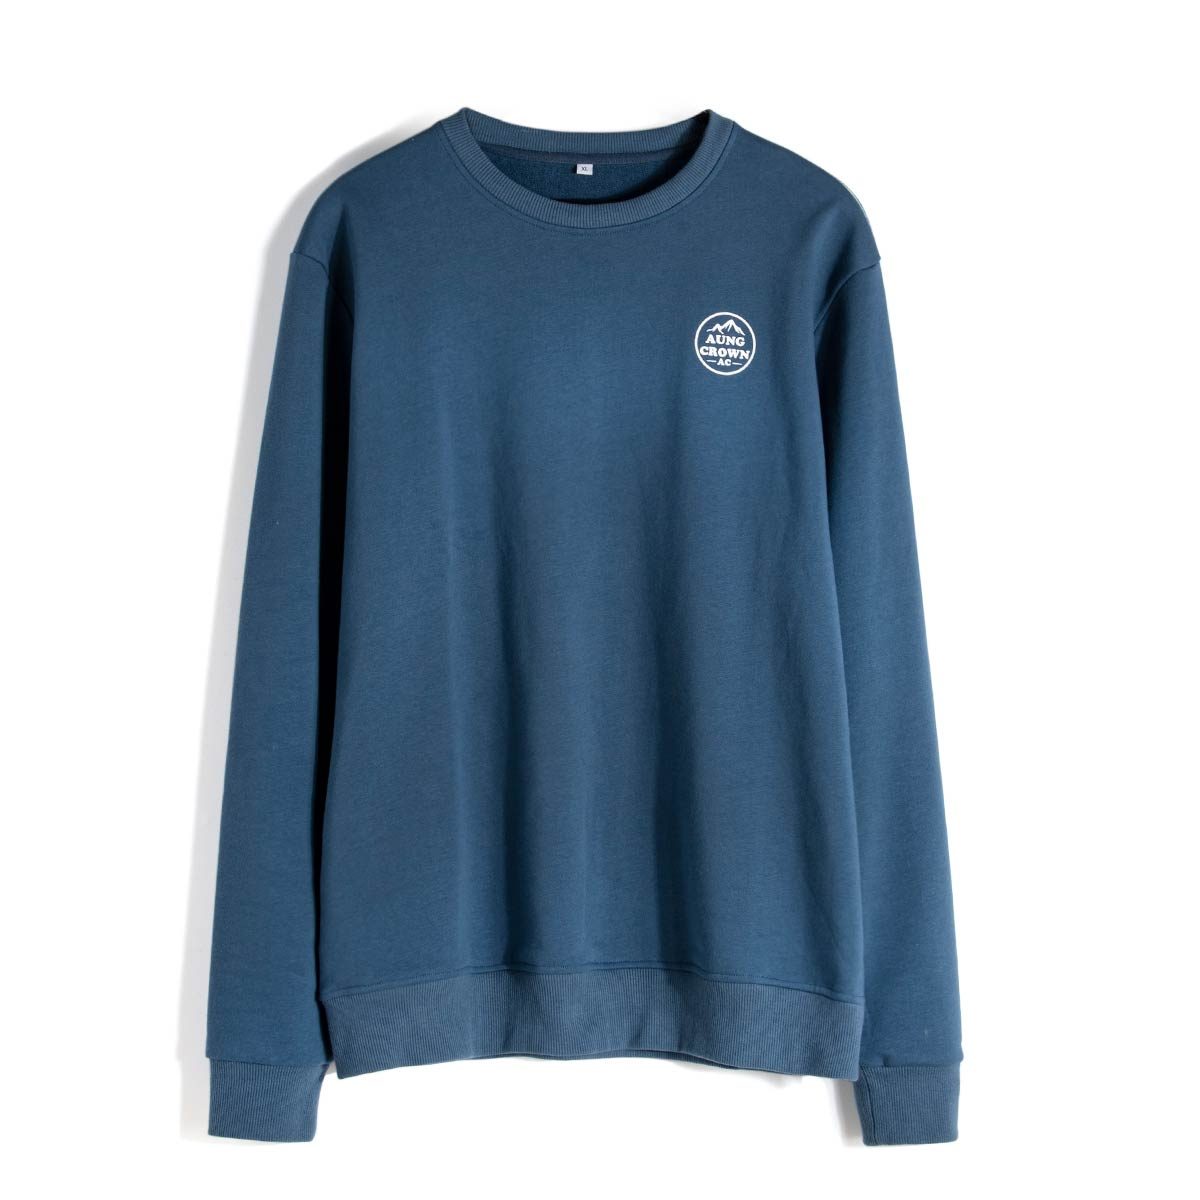 blue-sweatshirt-at-the-front-view-SFZ-210709-3